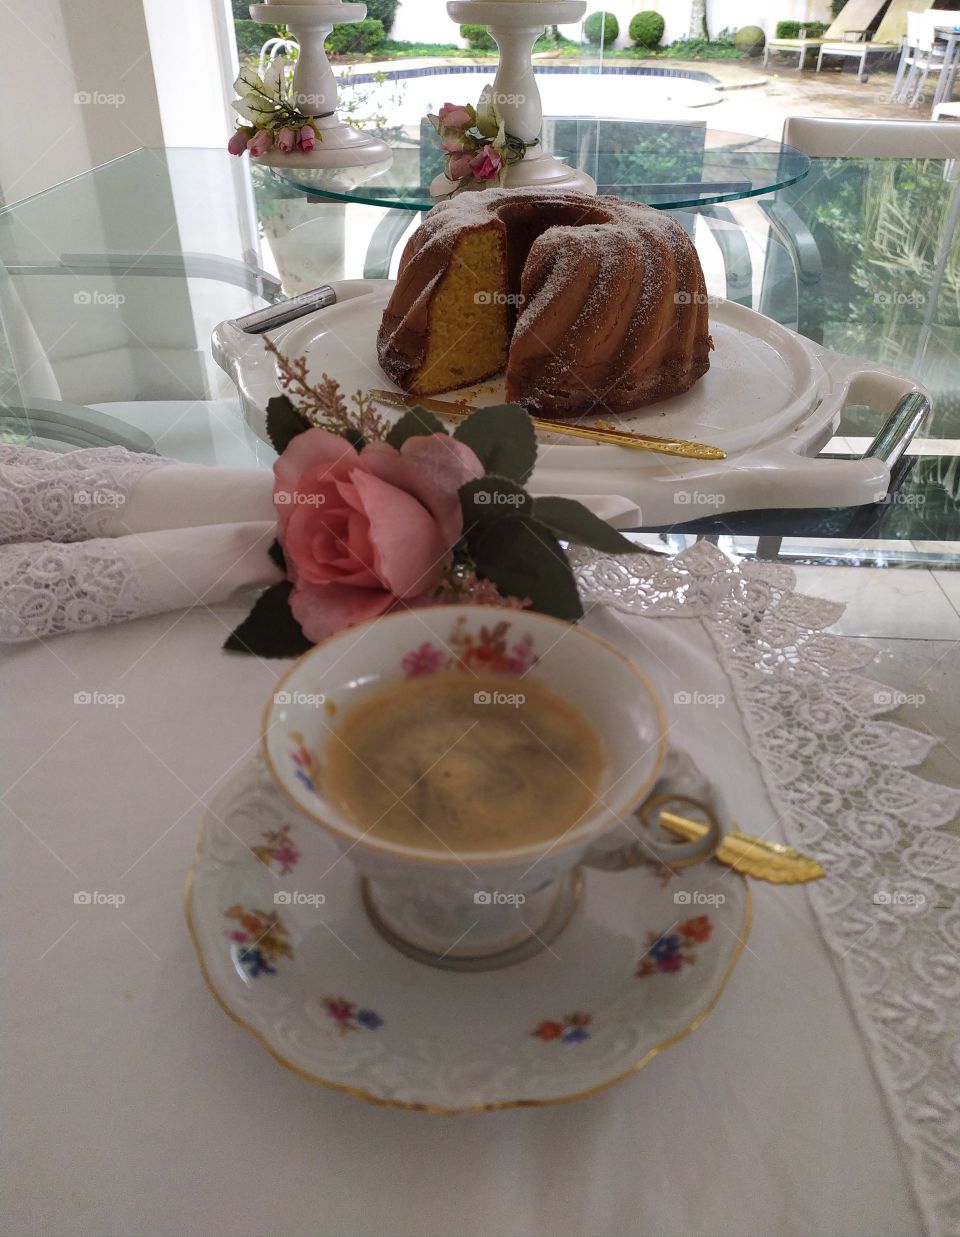 A special and lovely cup of coffee with a delicious cake